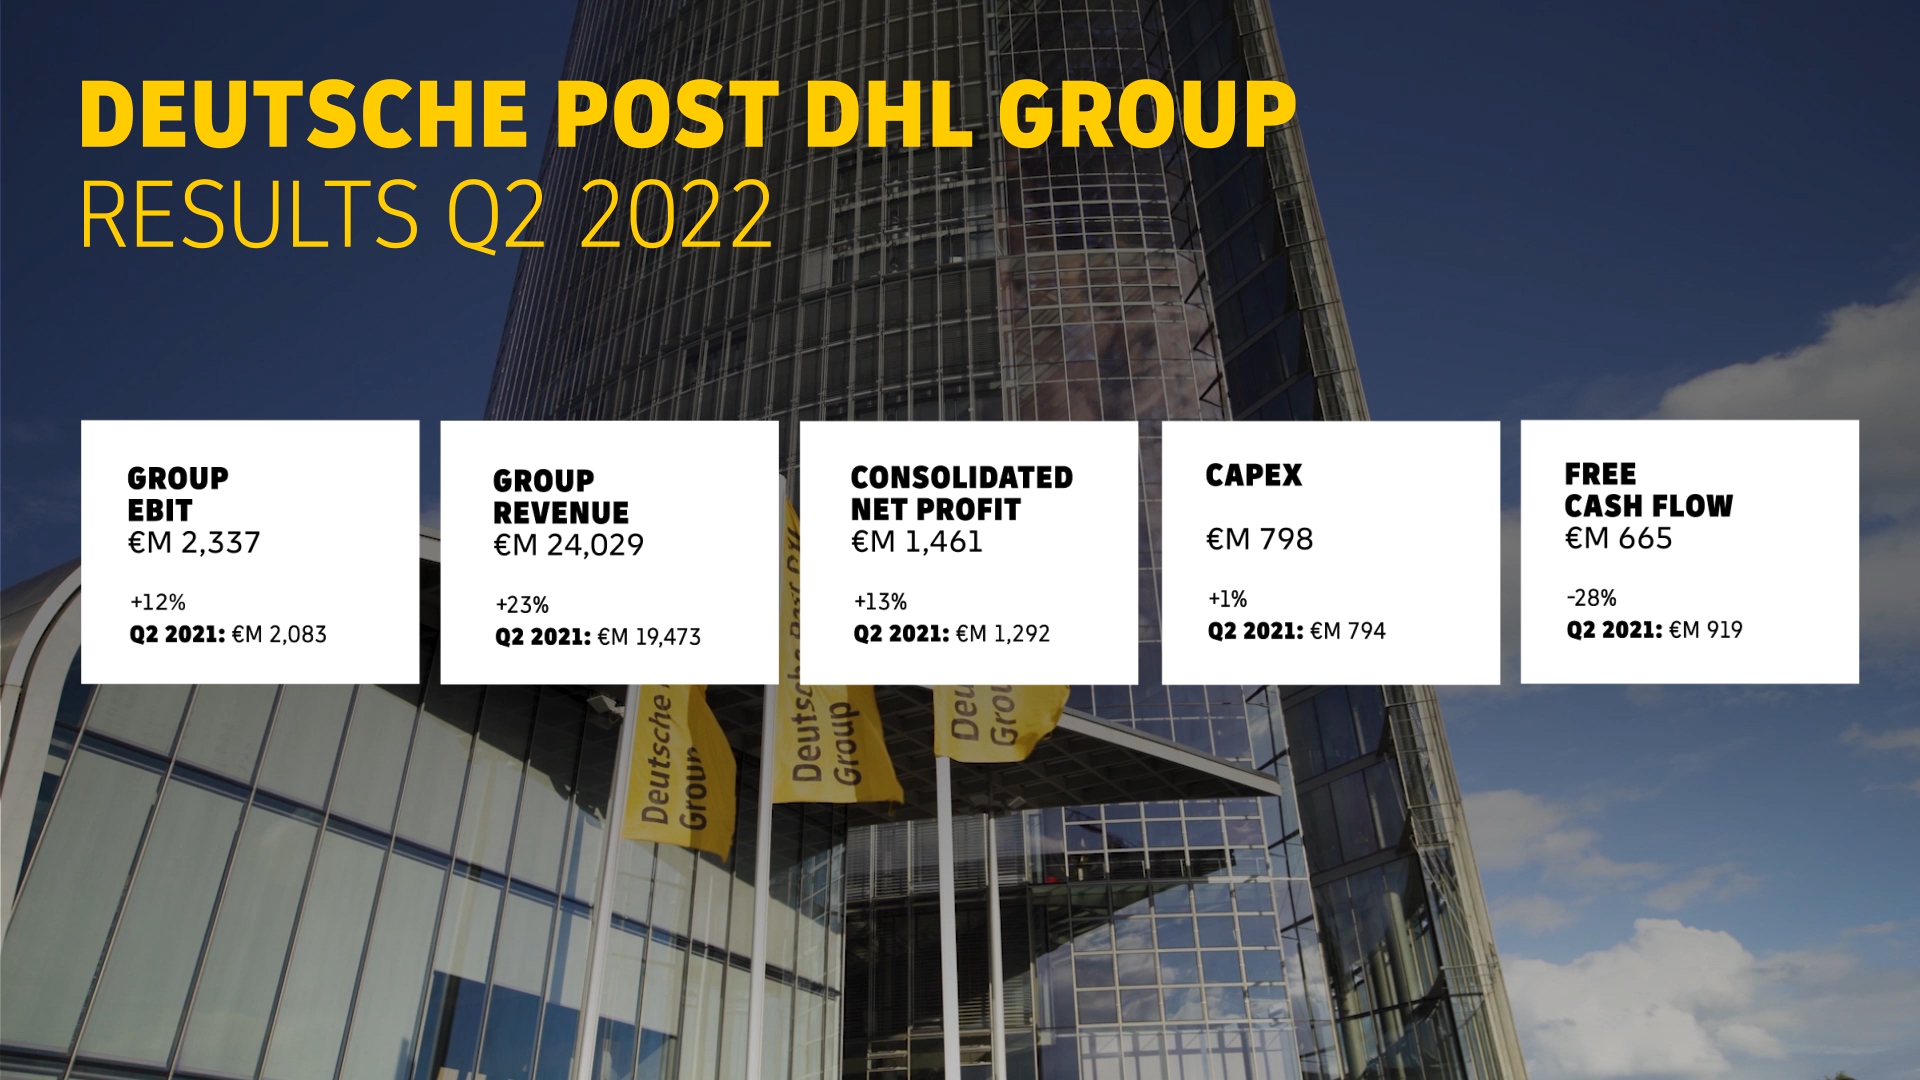 Deutsche Post DHL Group revenue and EBIT deliver double digit growth in Q2 2022. Business outlook and EBIT guidance still positive.